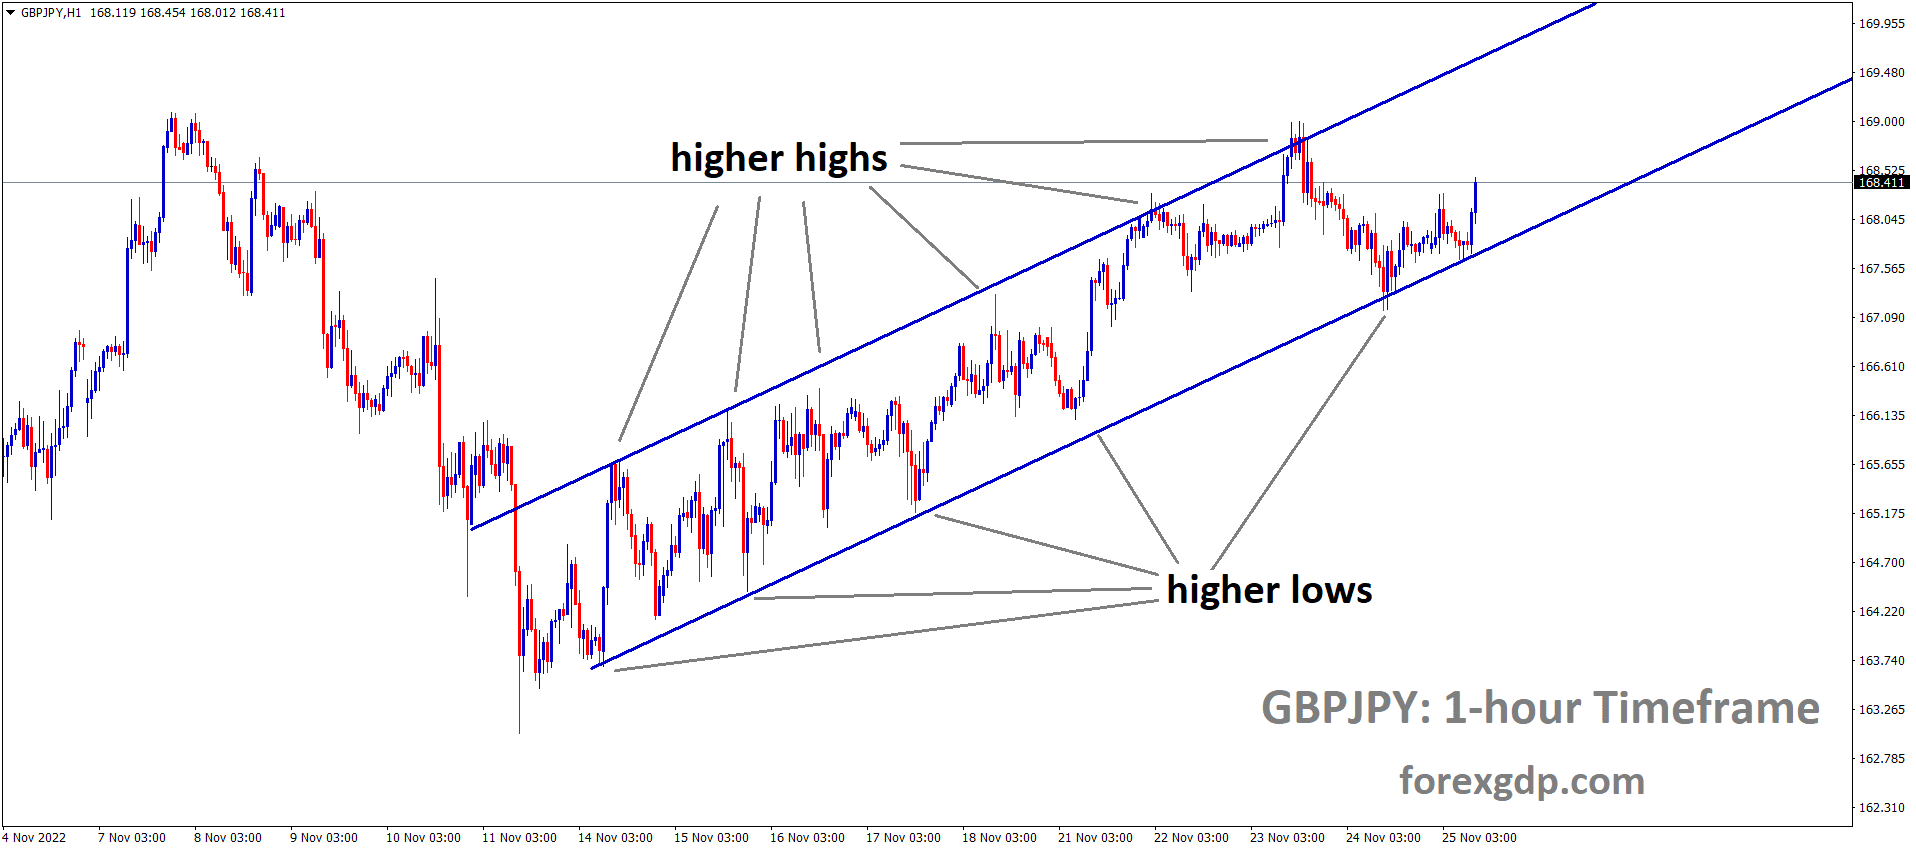 GBPJPY is moving in an Ascending channel and the market has rebounded from the higher low area of the channel